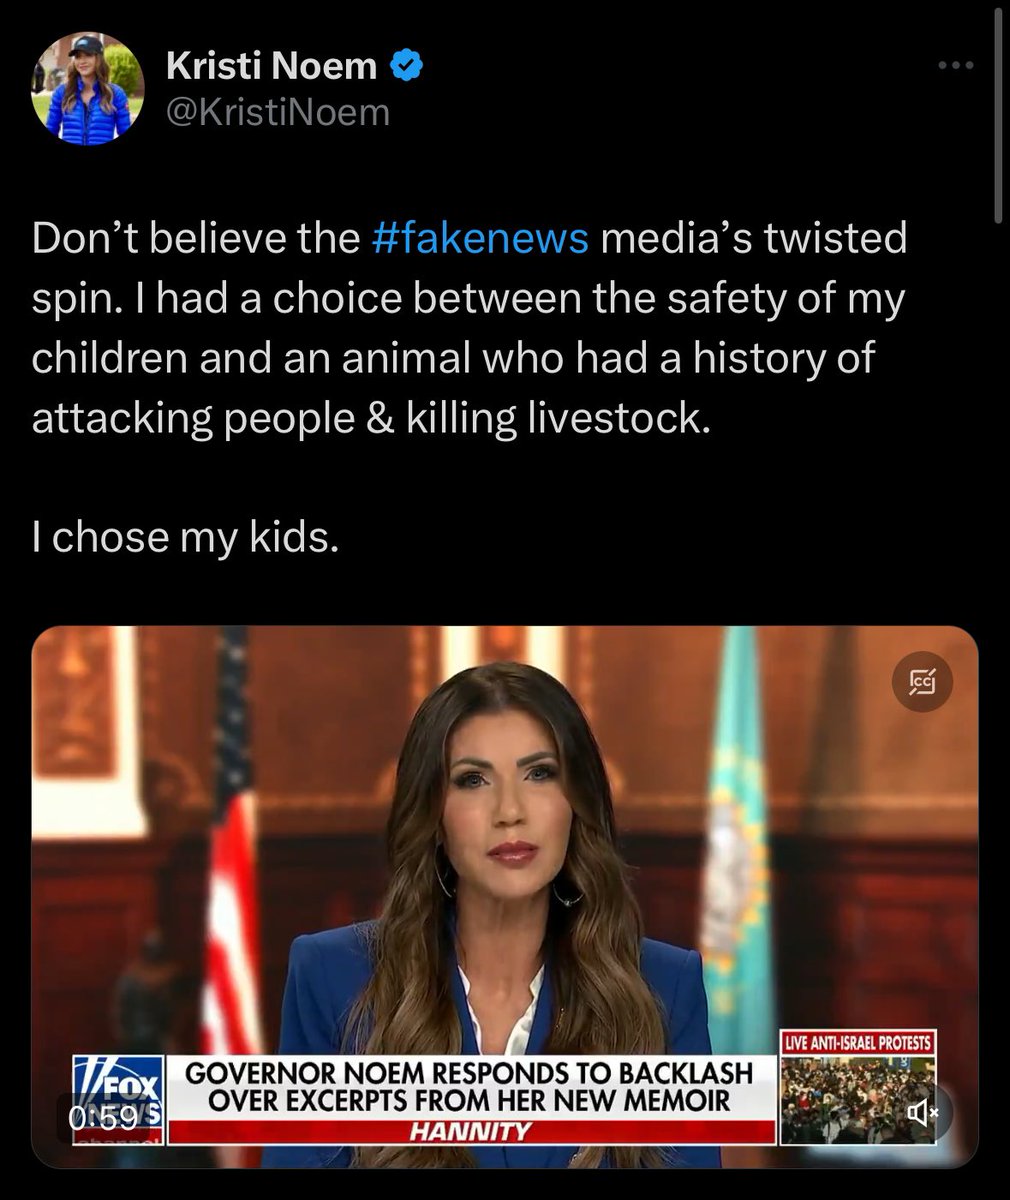 Don’t believe Kristi Noem’s twisted spin. The puppy she murdered posed no threat to her children and did not have a “history of attacking people & killing livestock.” He did go after some chickens once. Dogs do that kind of stuff.

She chose murder.